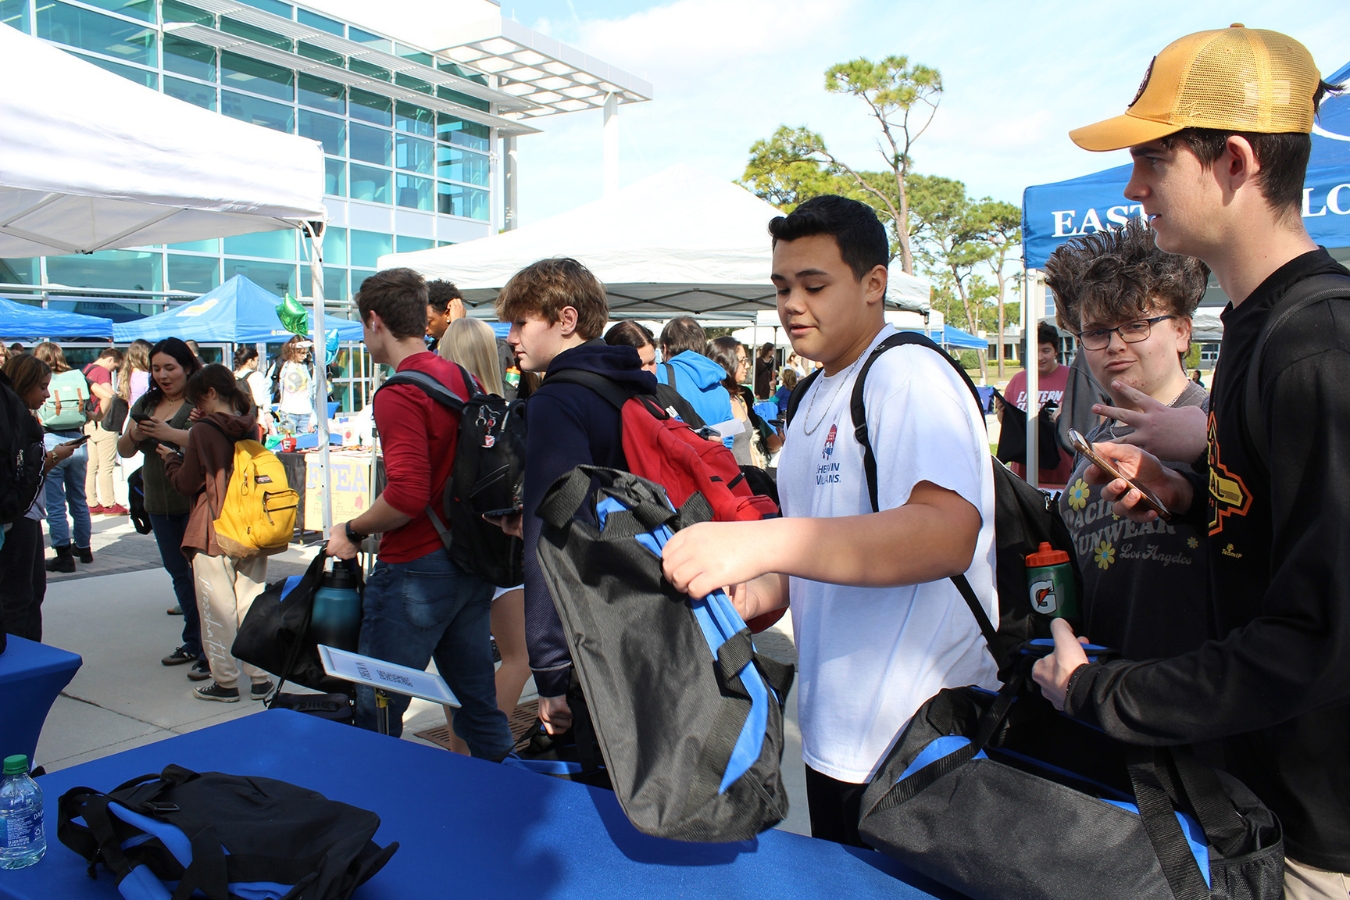 An image of a community-building welcome event: students waiting in line to receive free campus goodies and EFSC themed items at an event check-in table